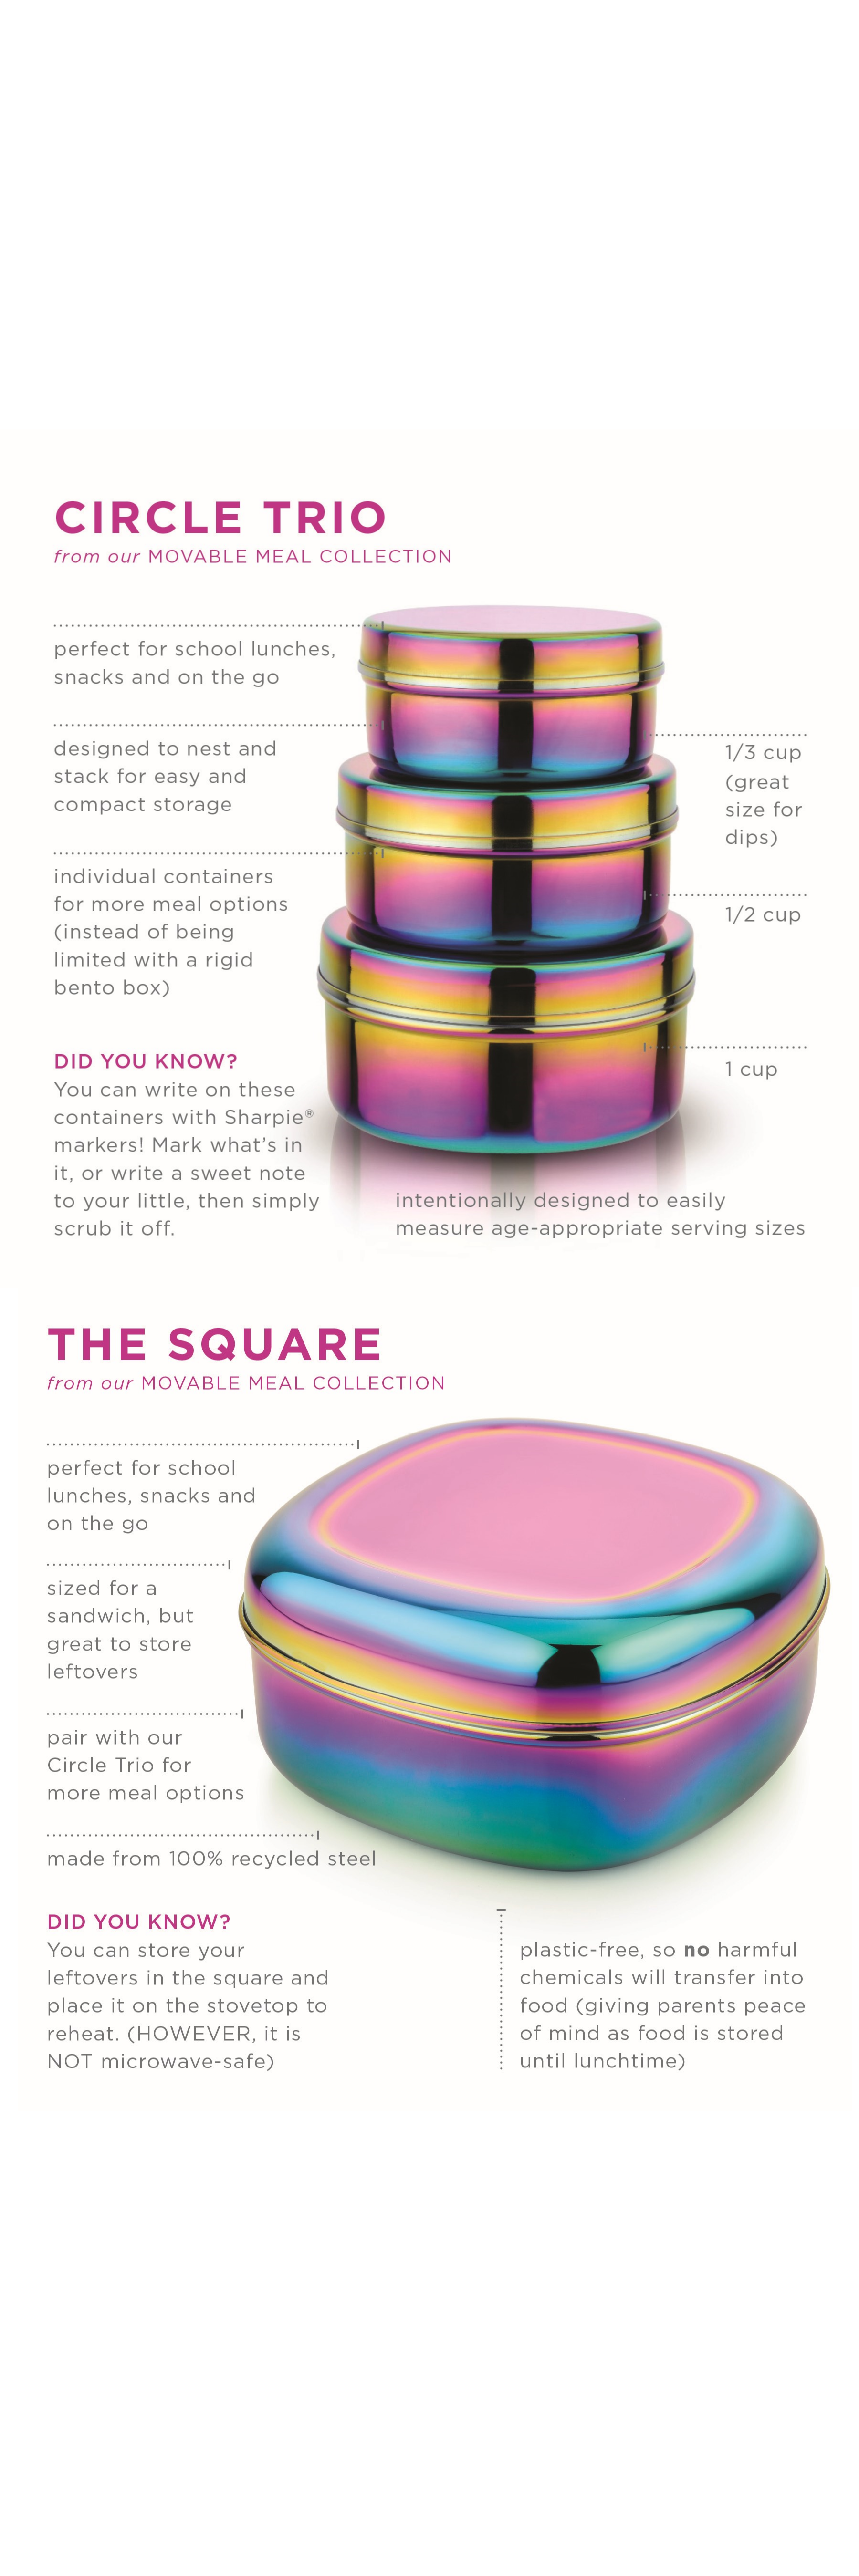 Movable Meal collection - Our doctor-designed colorful containers with lids are made with 100% recycled steel and without harmful plastic chemicals. The perfect bundle for school lunches (fit well in most lunchboxes), post-sport or afterschool activity